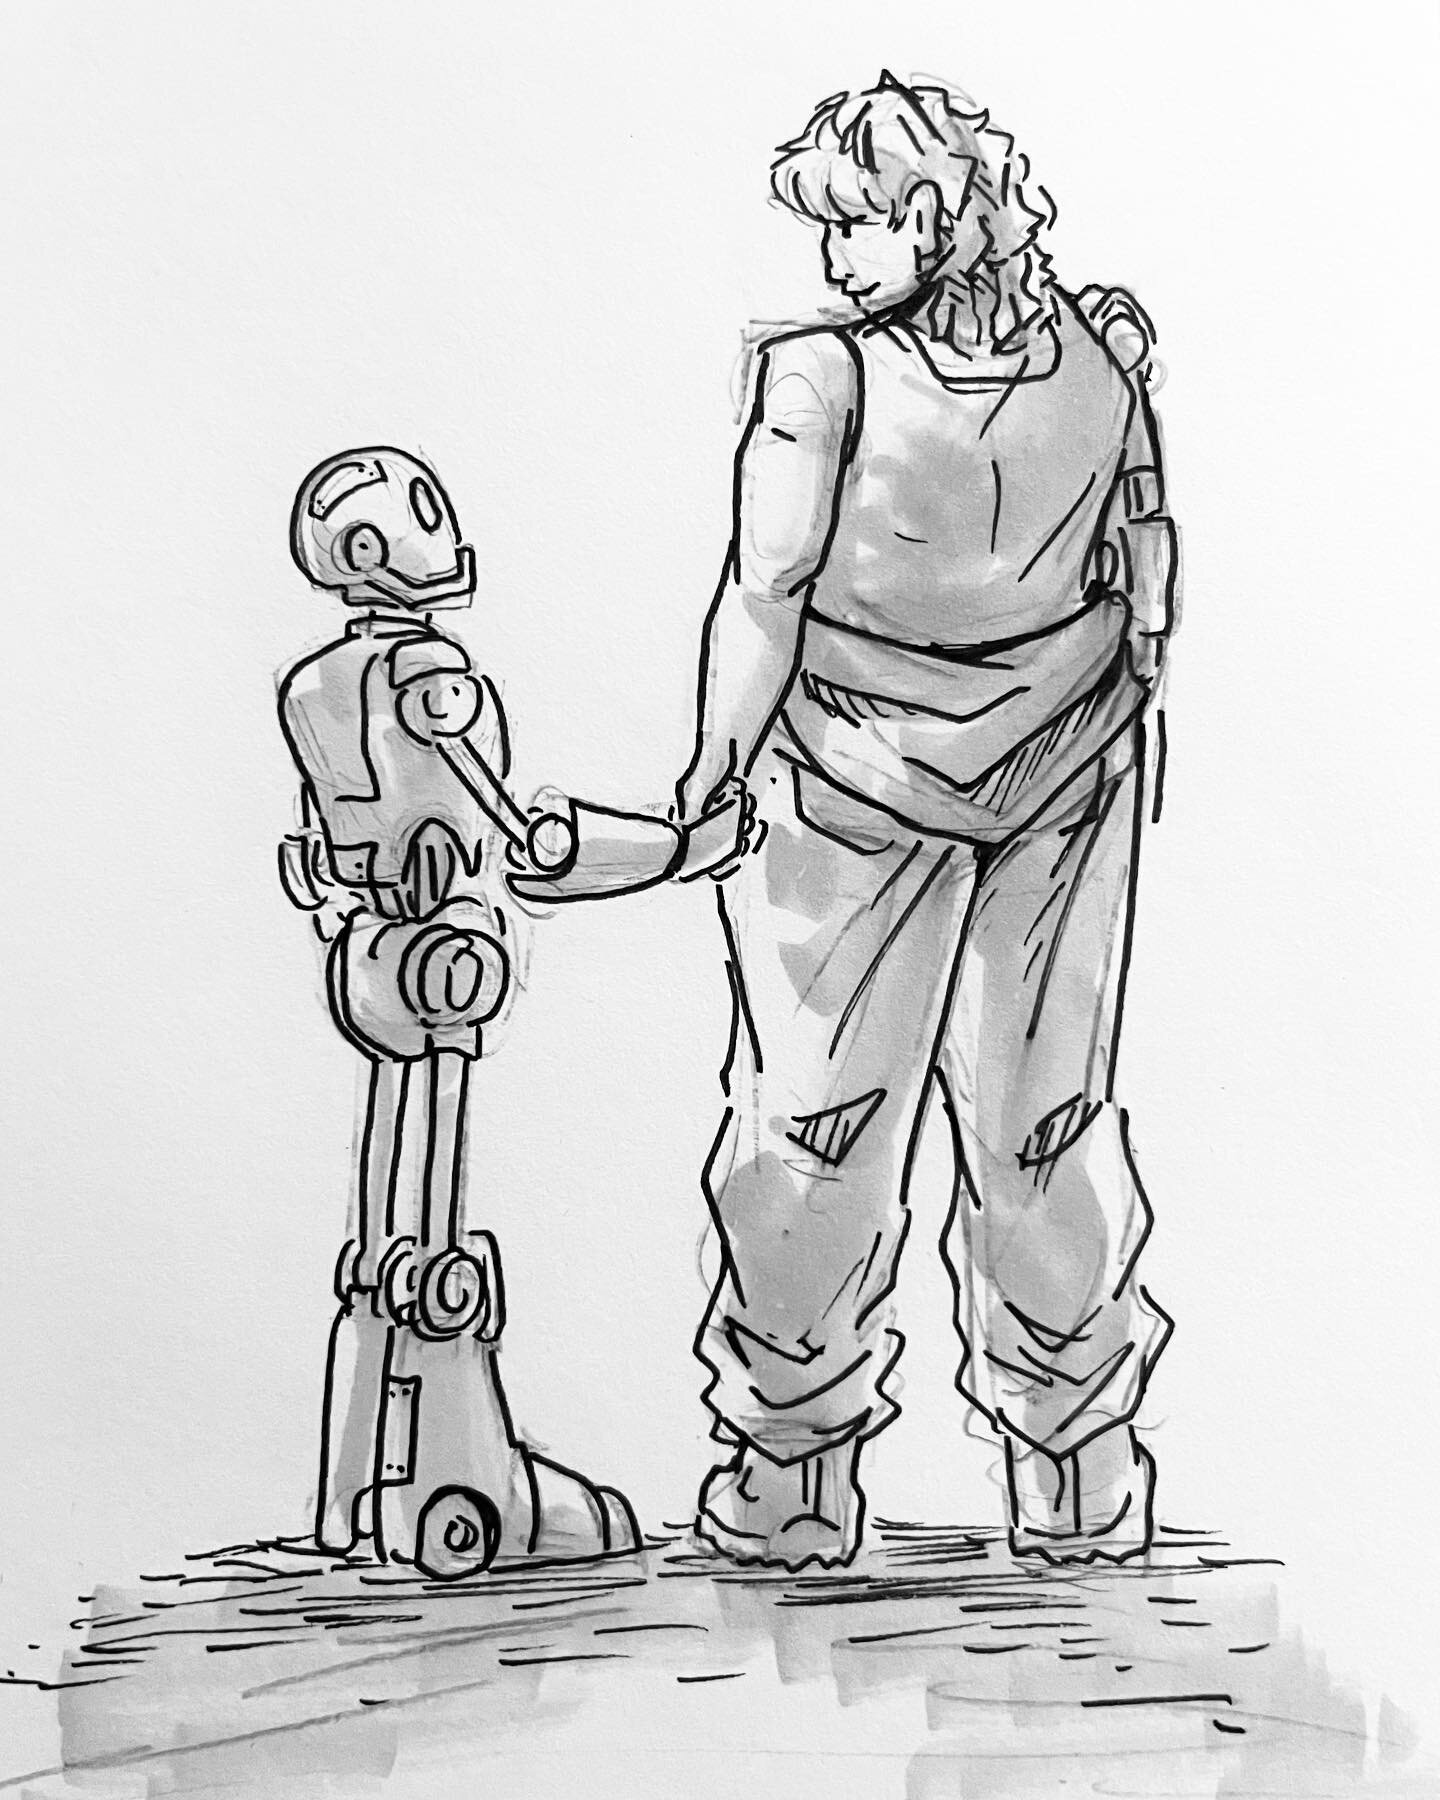 sketches from my senior thesis! my thesis is a found family cyberpunk store with a mechanical engineer named Marcy (human) and a robot with memory loss named R7D3R &ldquo;Ryder&rdquo; (robot). I&rsquo;ll be posting more art of these two over the next